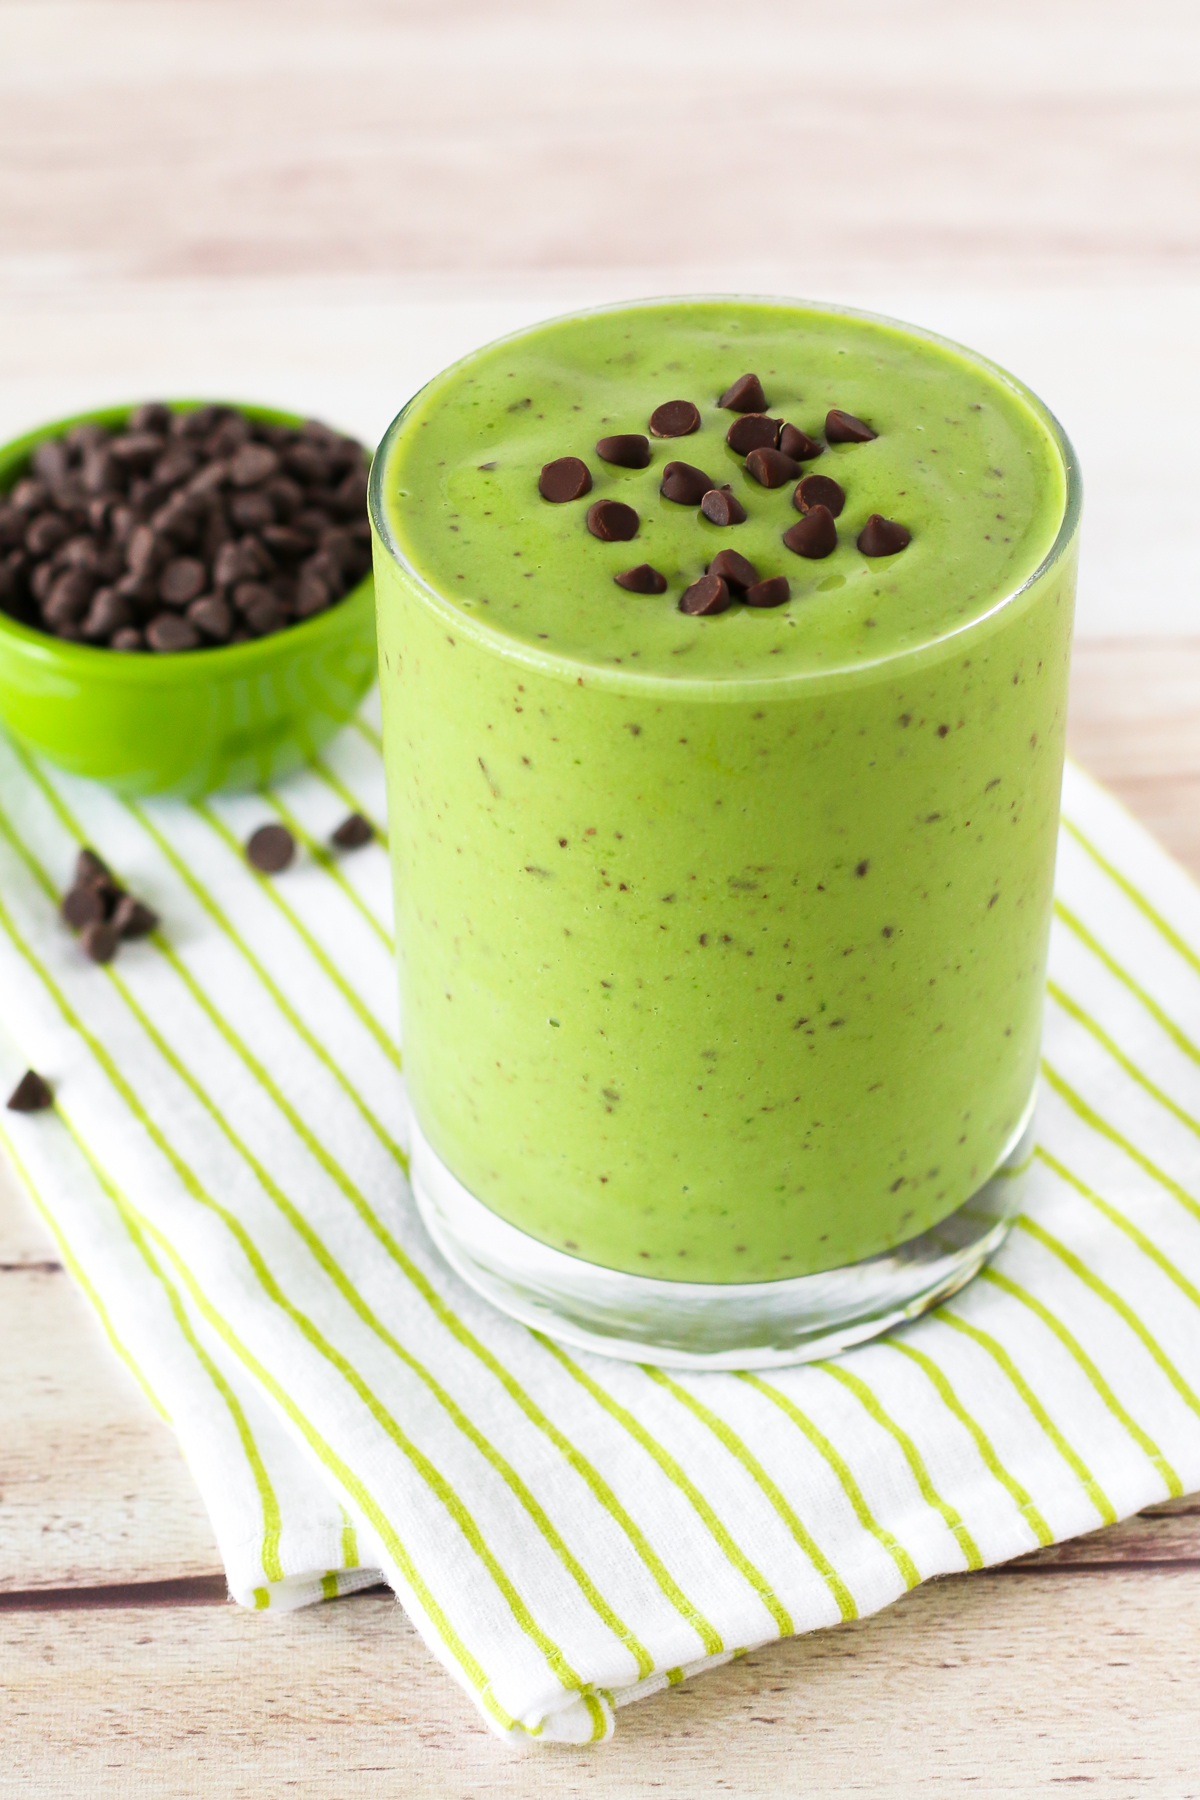 Dairy Free Mint Chocolate Chip Smoothie. Made with just a few simple ingredients, this mint chocolate chip smoothie tastes too good to be healthy!